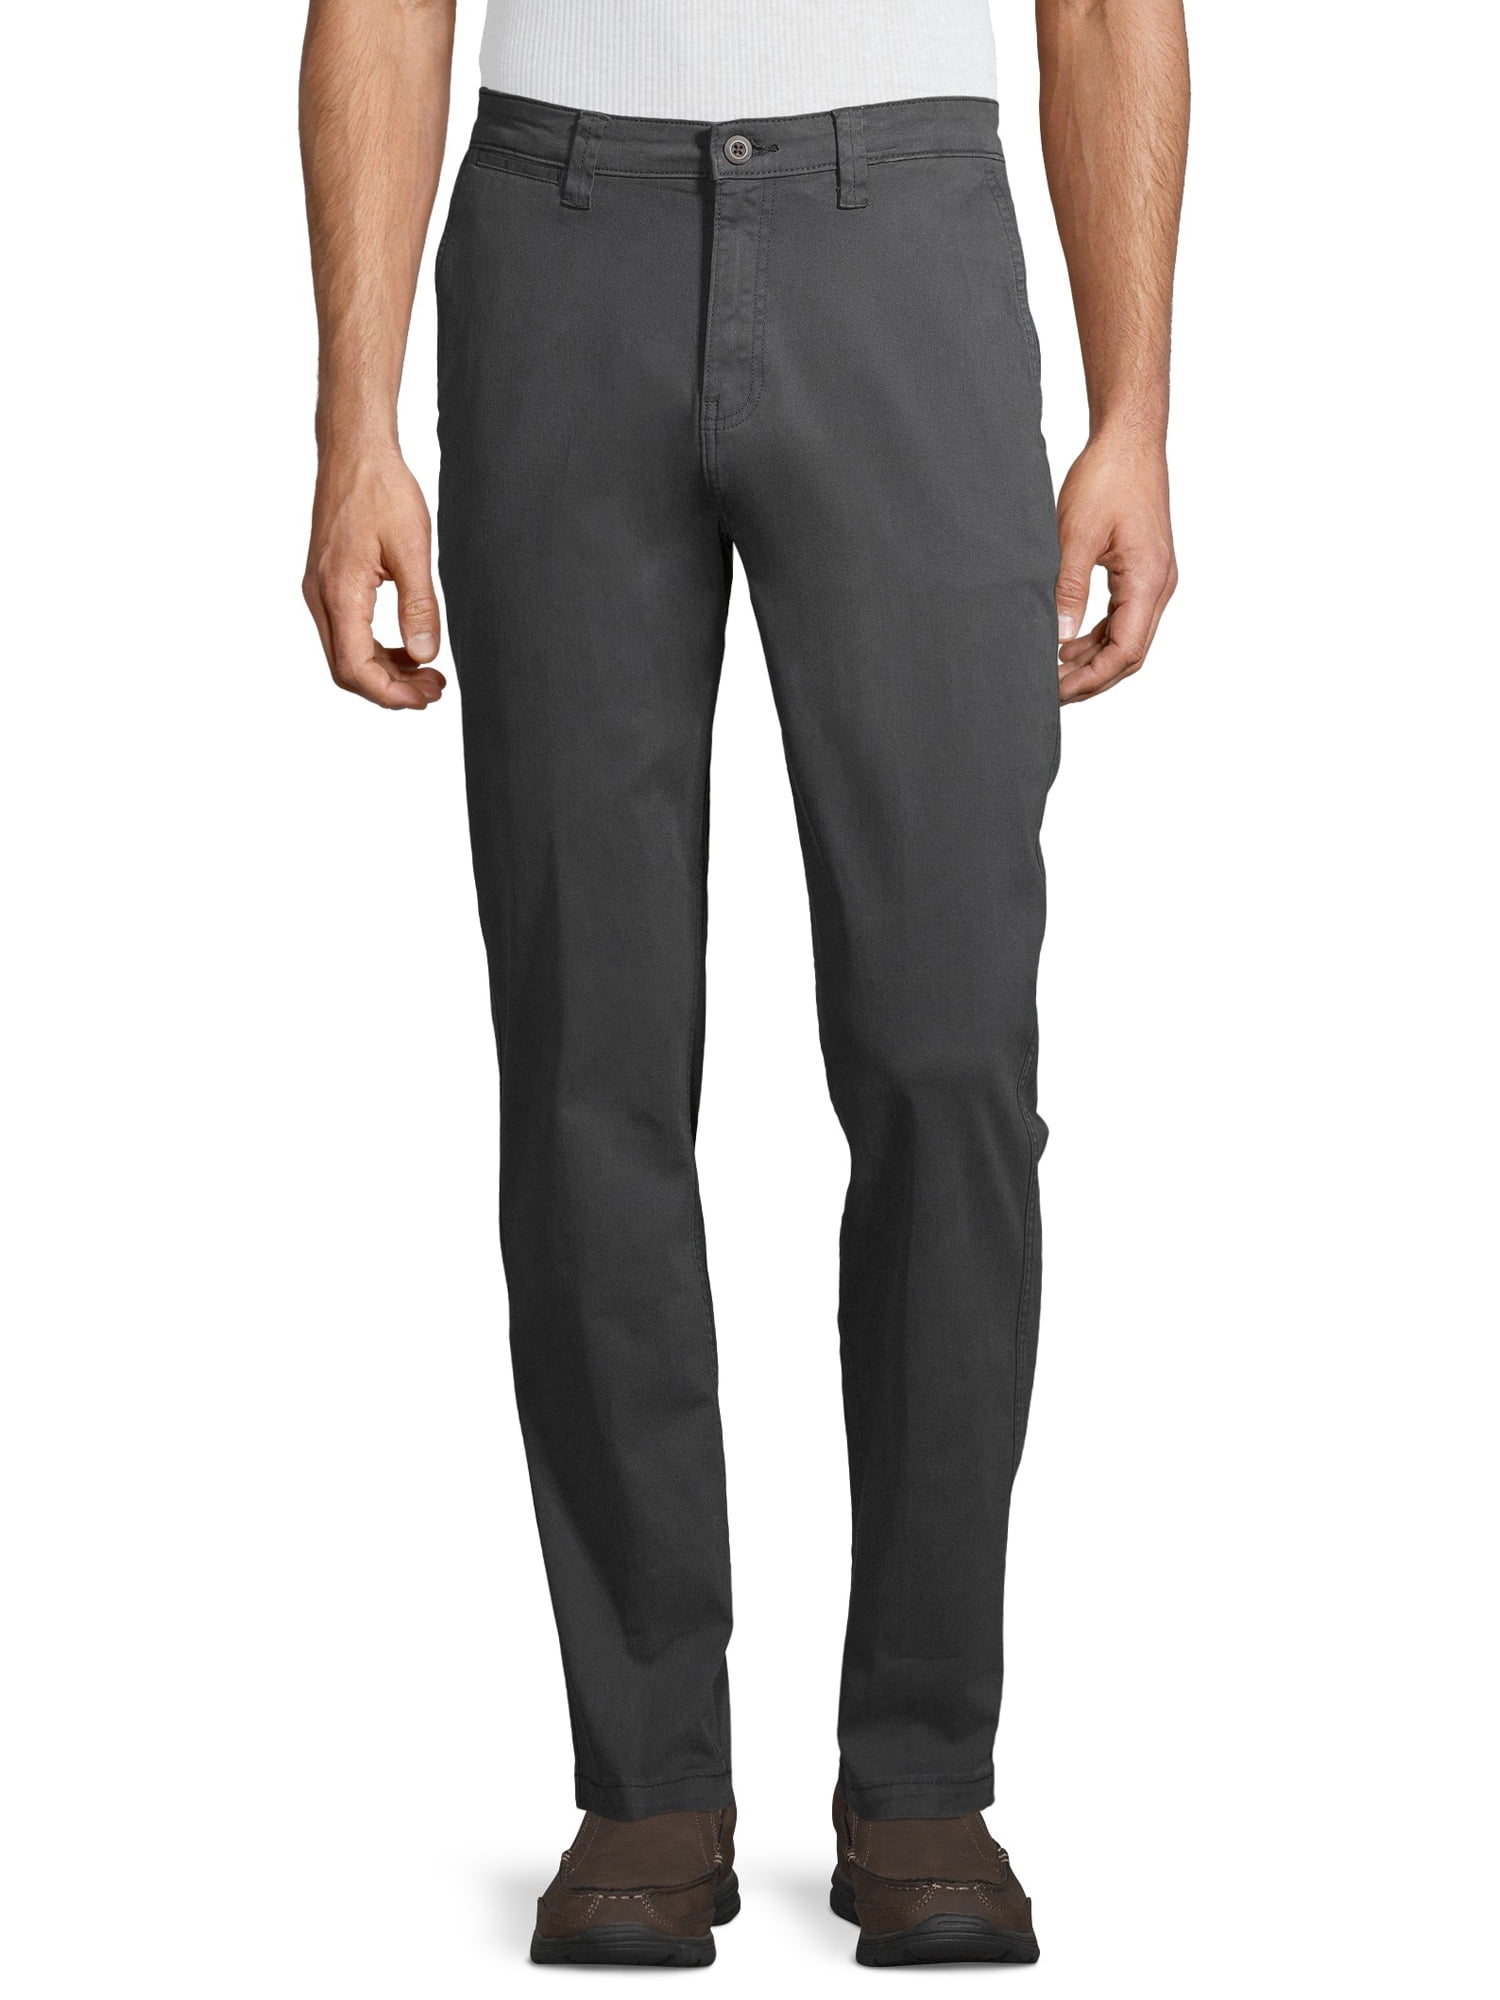 area Nationwide mint George Men's Athletic Fit Chino Pants - Walmart.com